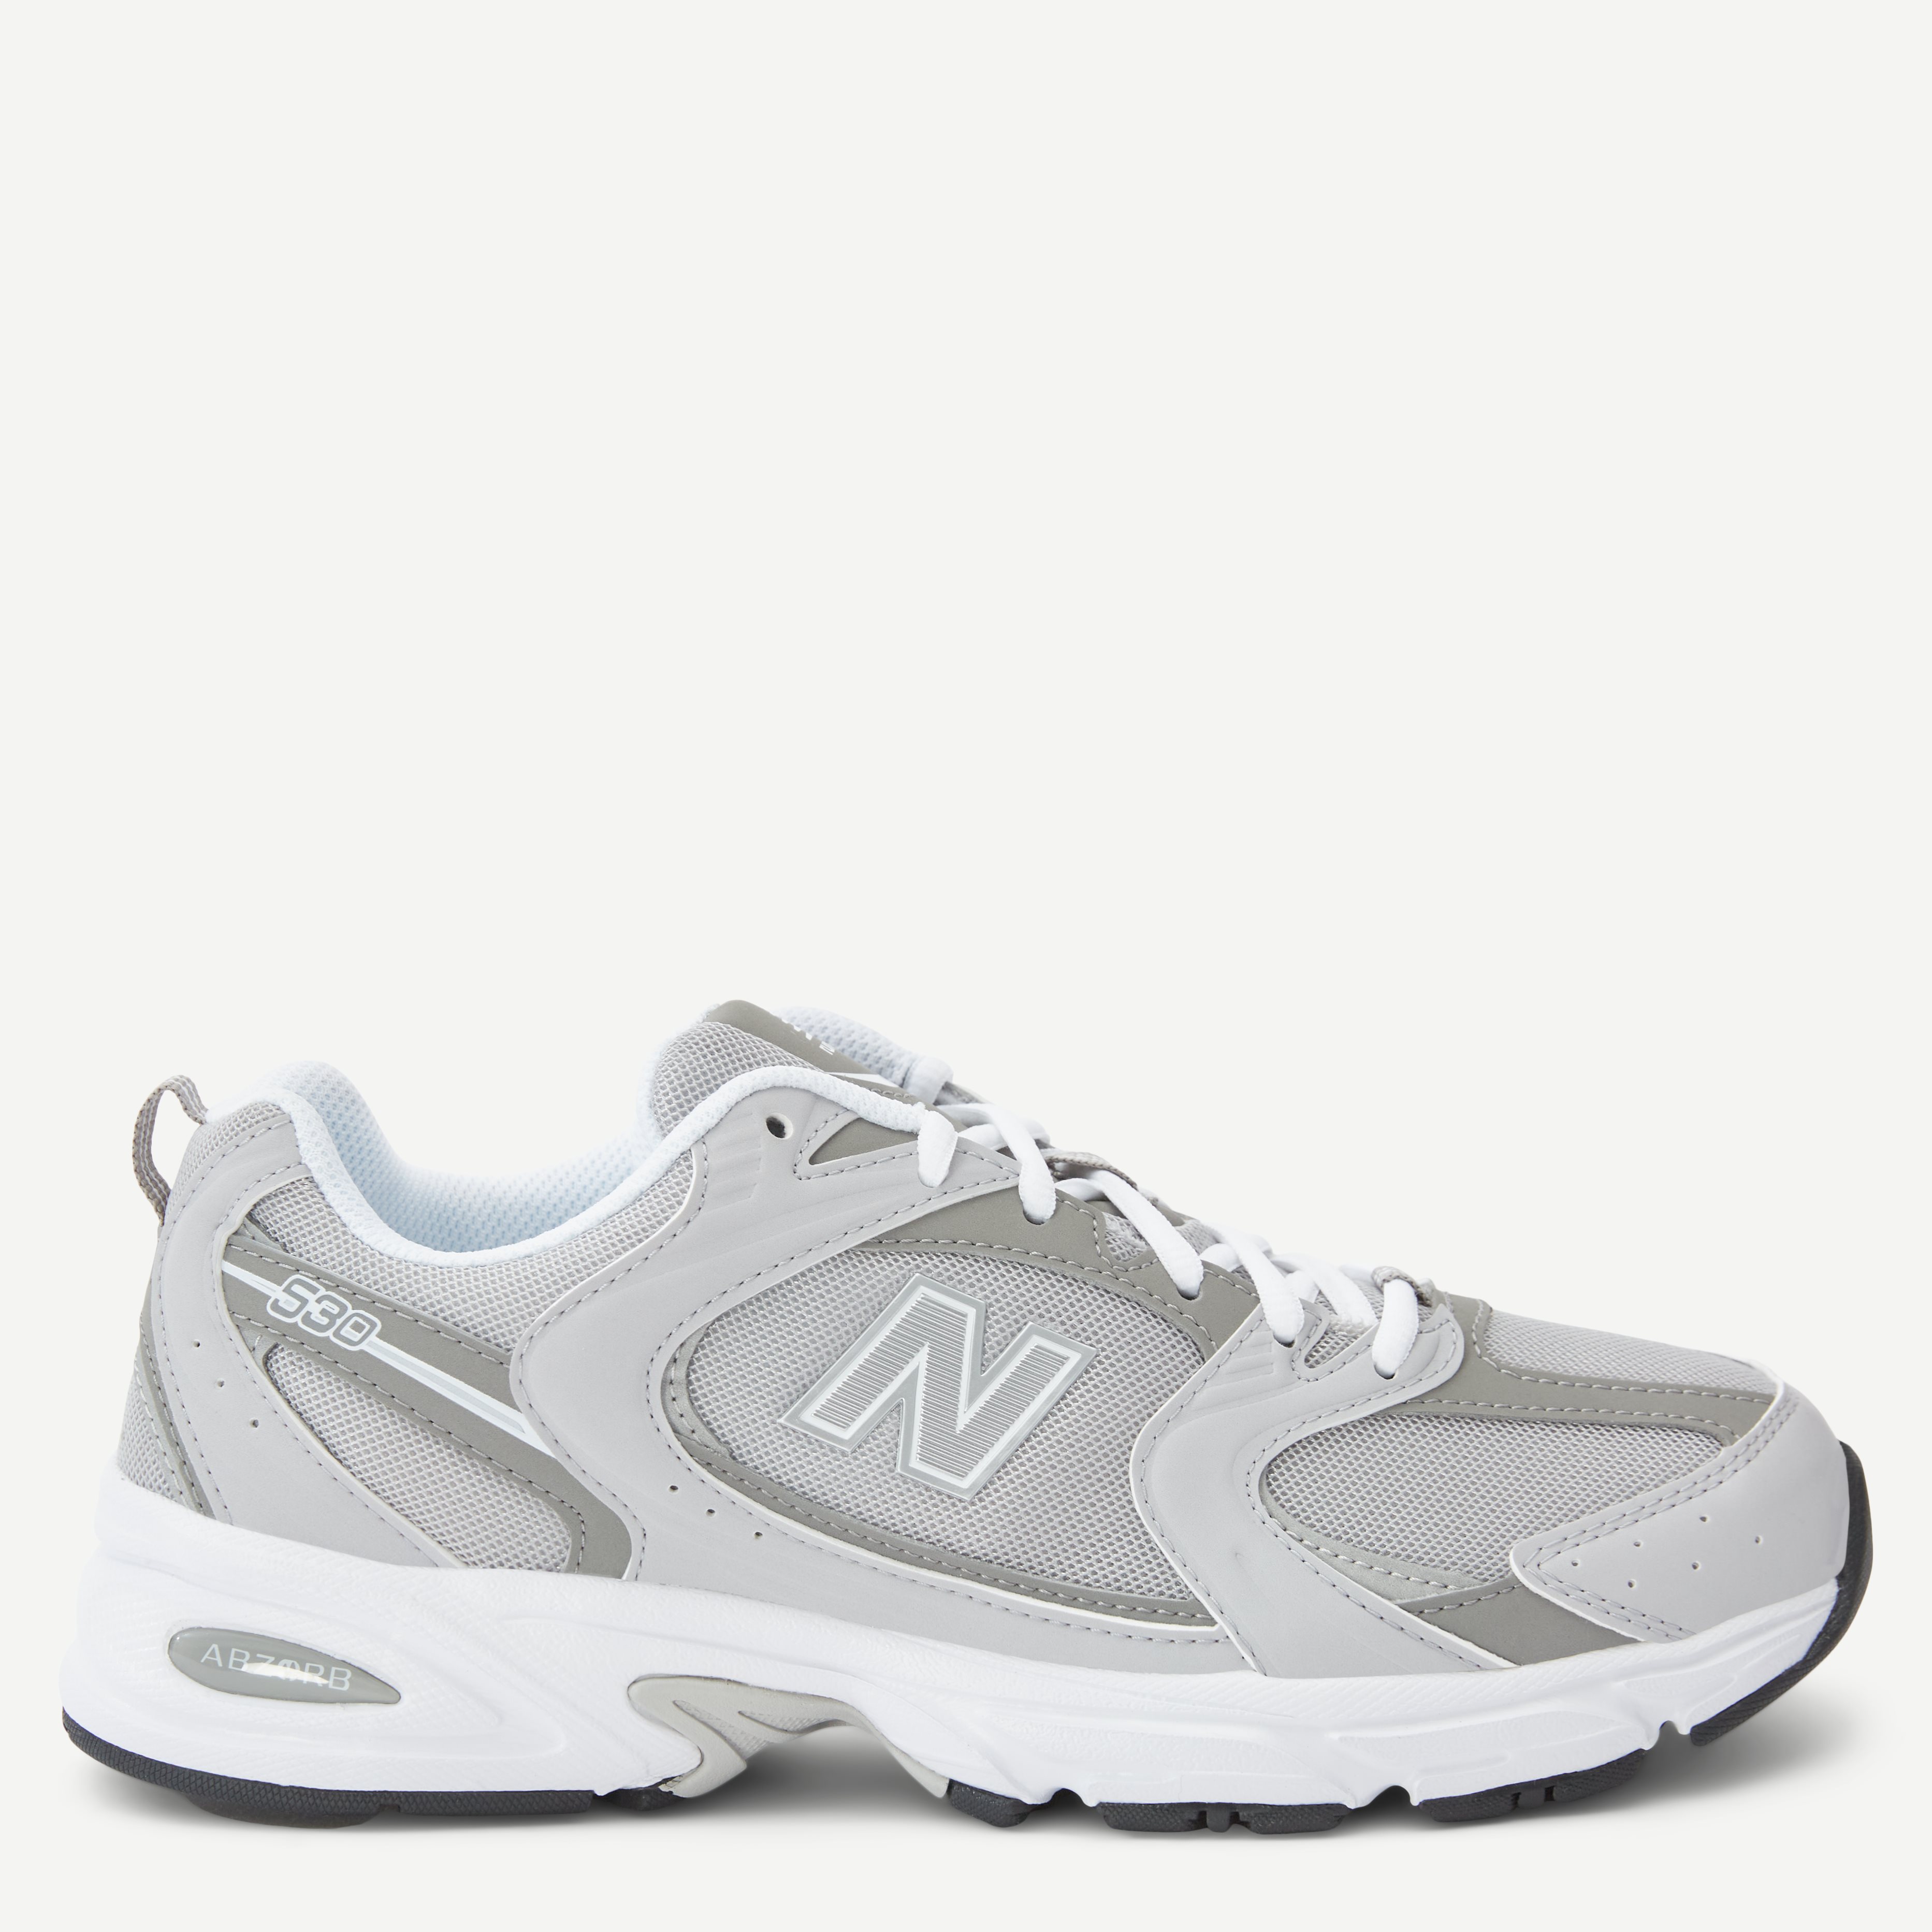 New Balance Shoes MR530 SMG Grey